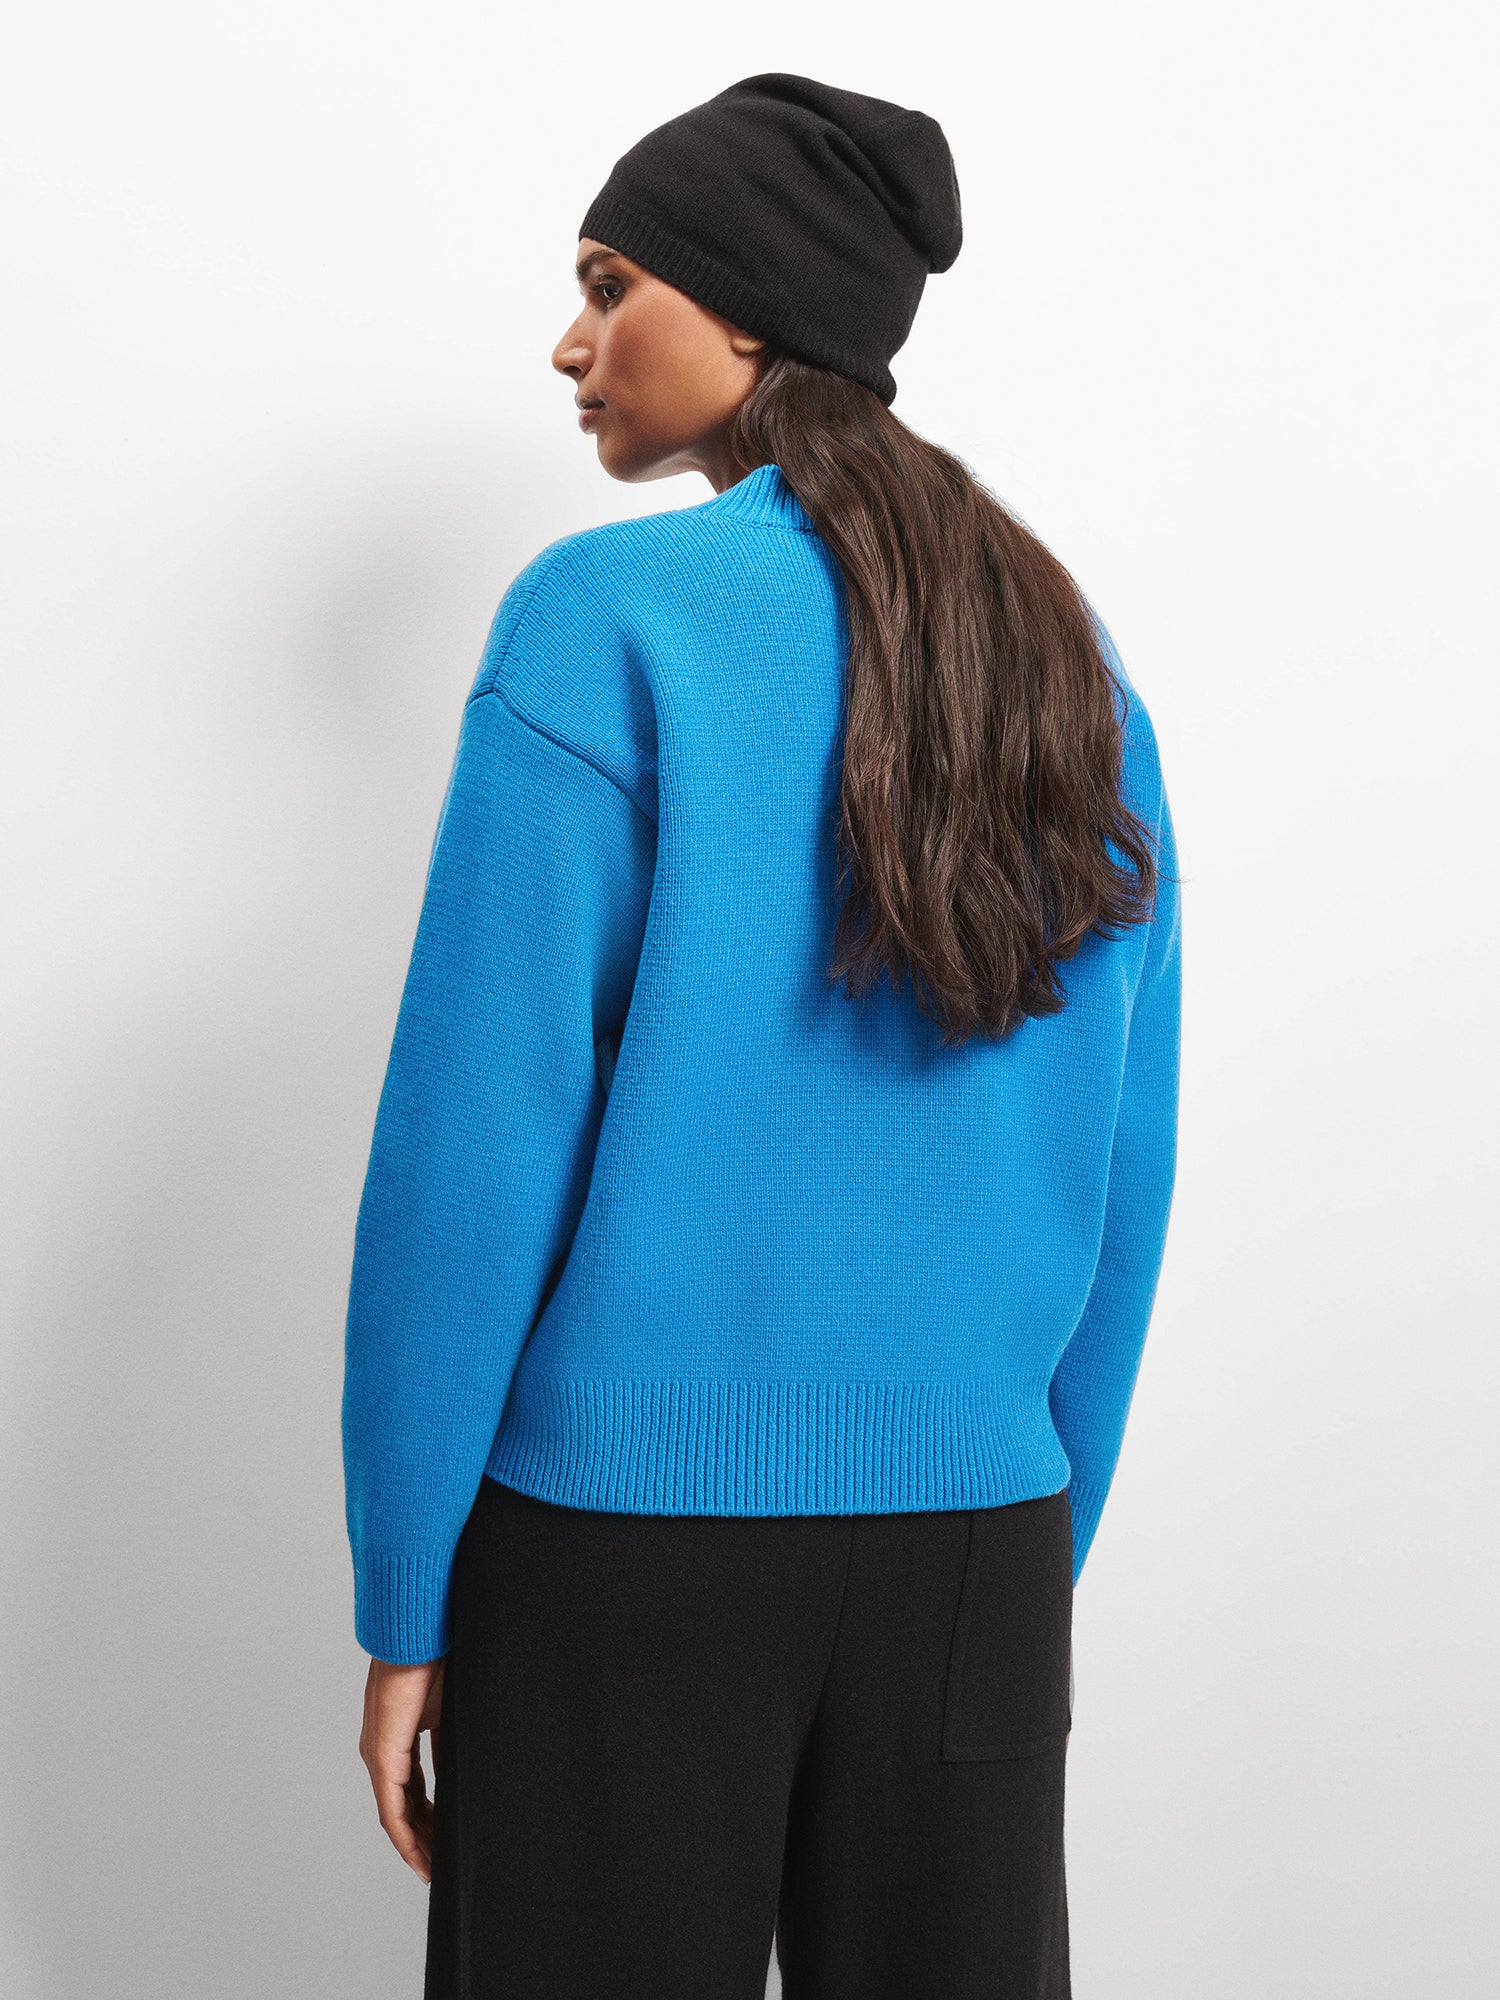 Recycled_Cashmere_Knit_Crew_NeckSweater_Cerulean_Blue-female-3